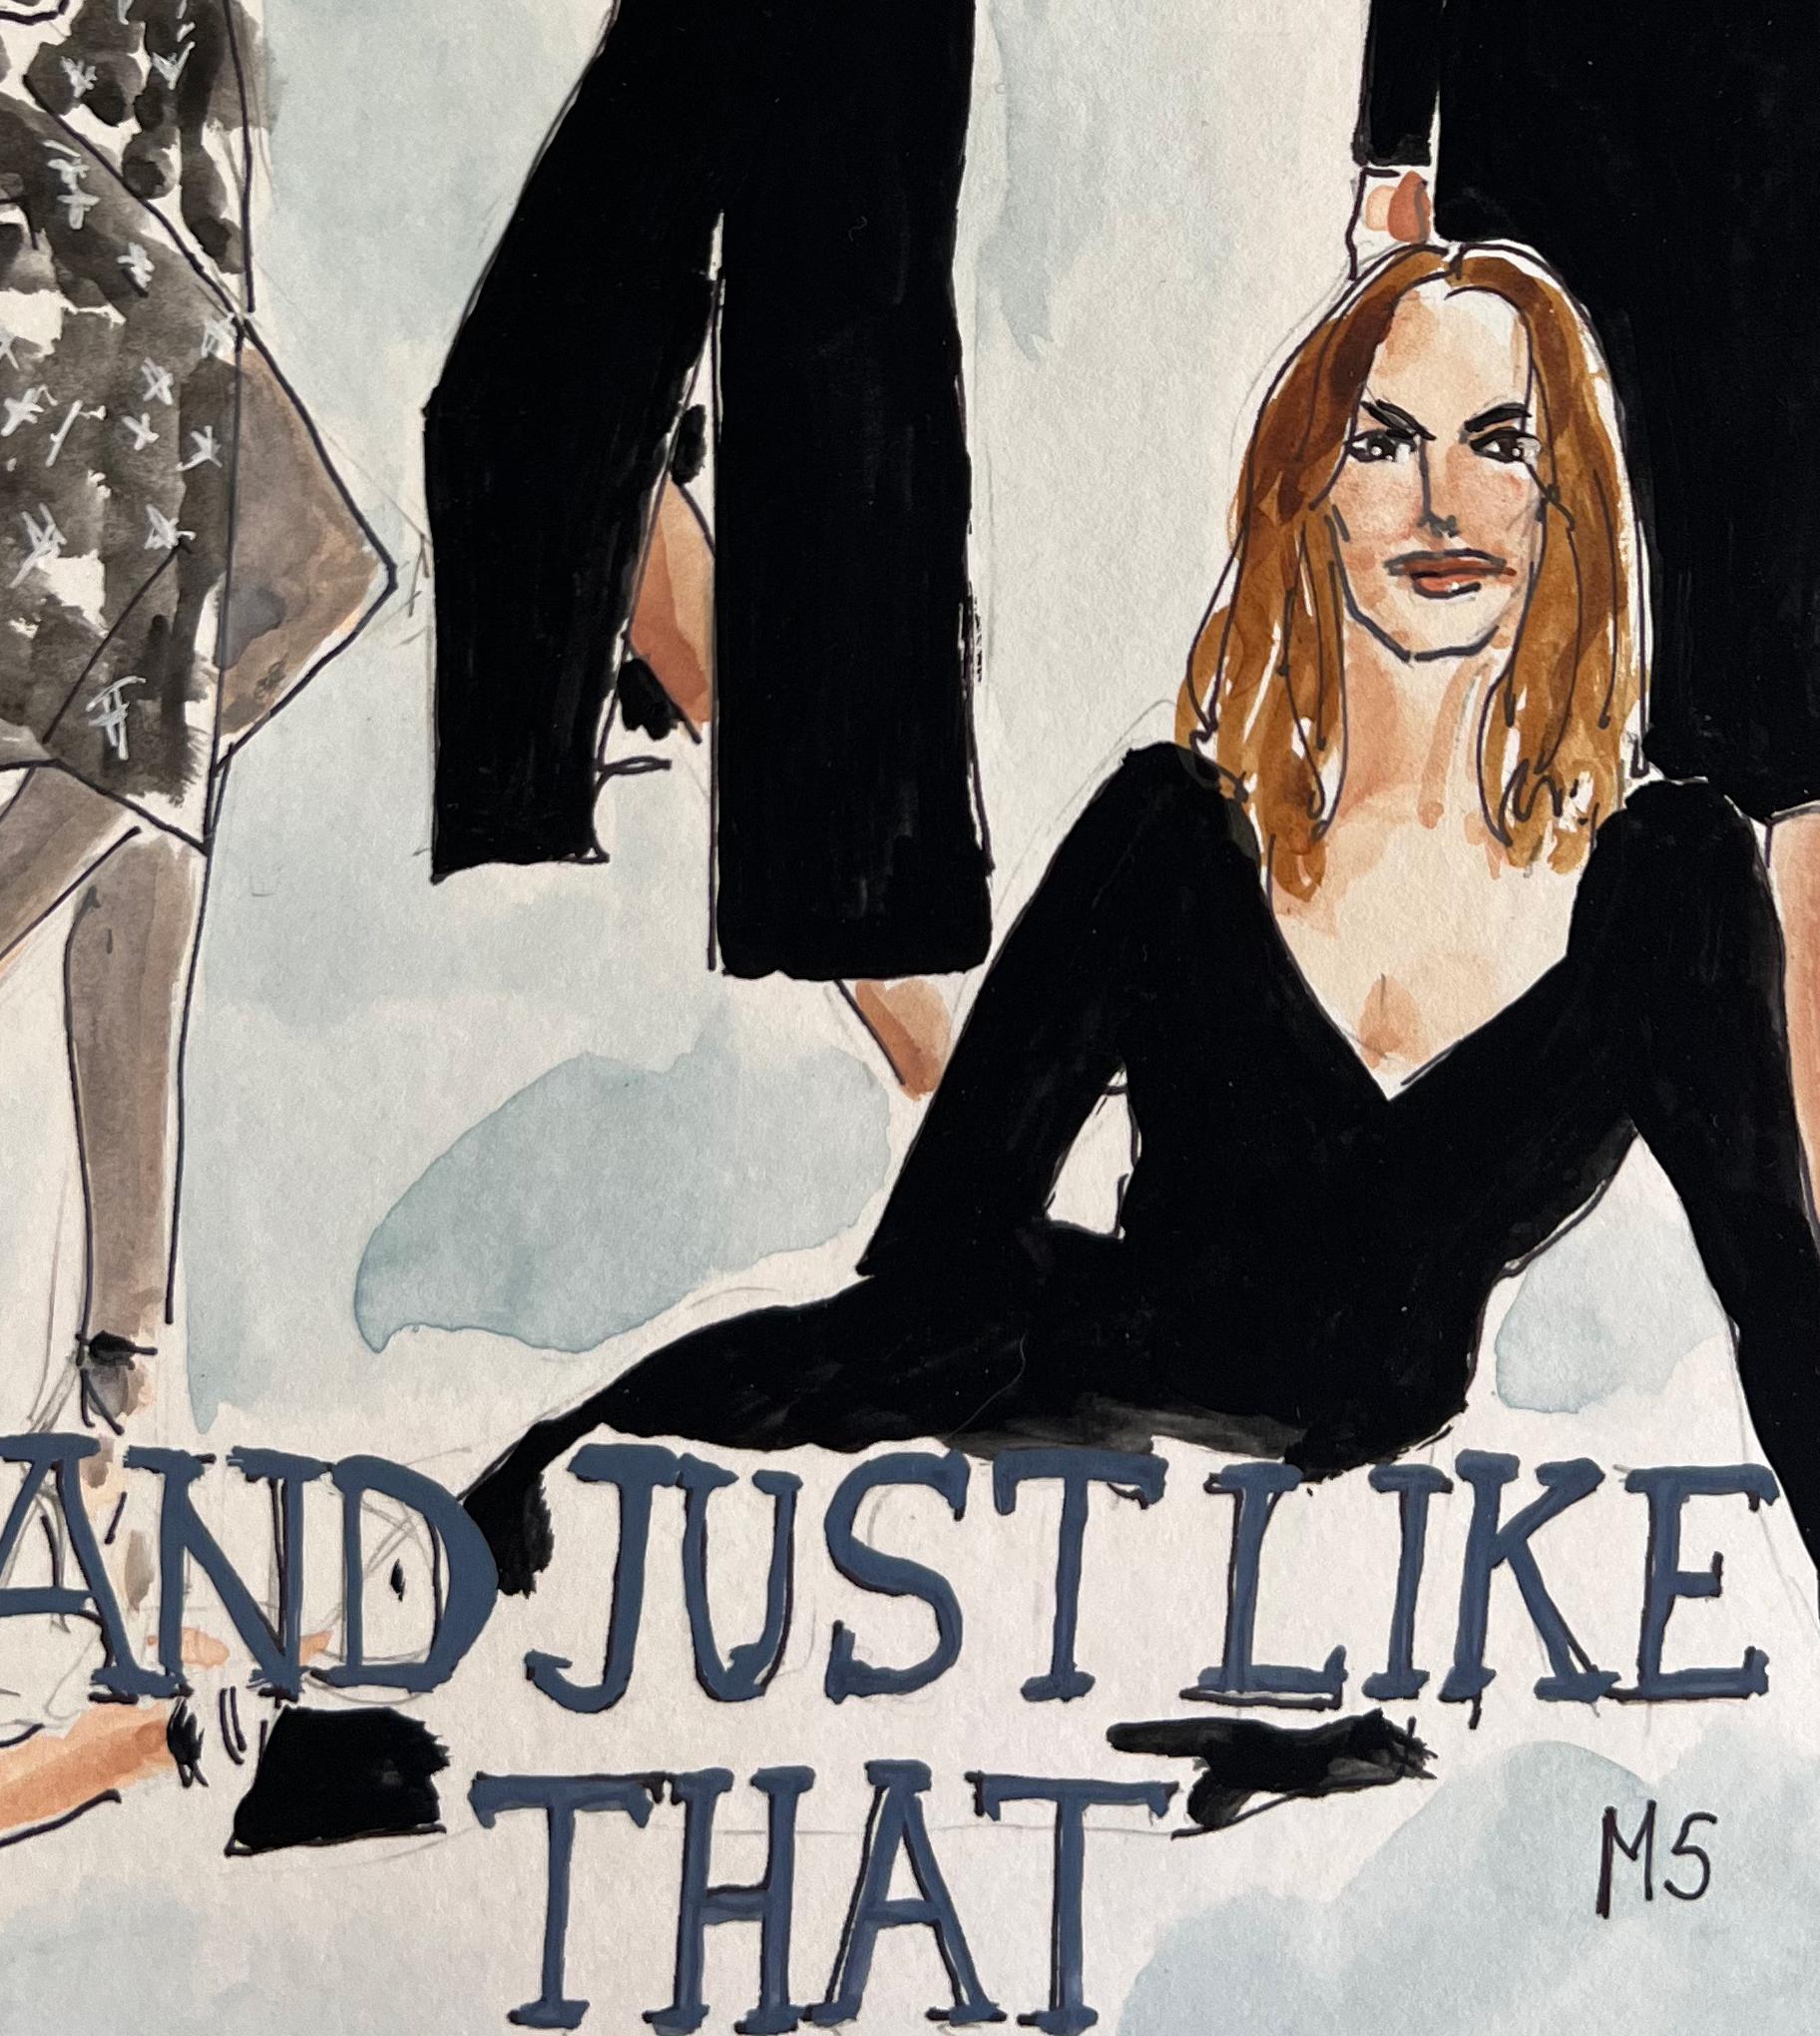 Supermodels in Vogue, by Manuel Santelices
 Ink, watercolor, and gouache on paper
Image size: 14 in. H x 11 in. W 
Unframed
2023

The worlds of fashion, society, and pop culture are explored through the illustrations of Manuel Santelices, a Chilean